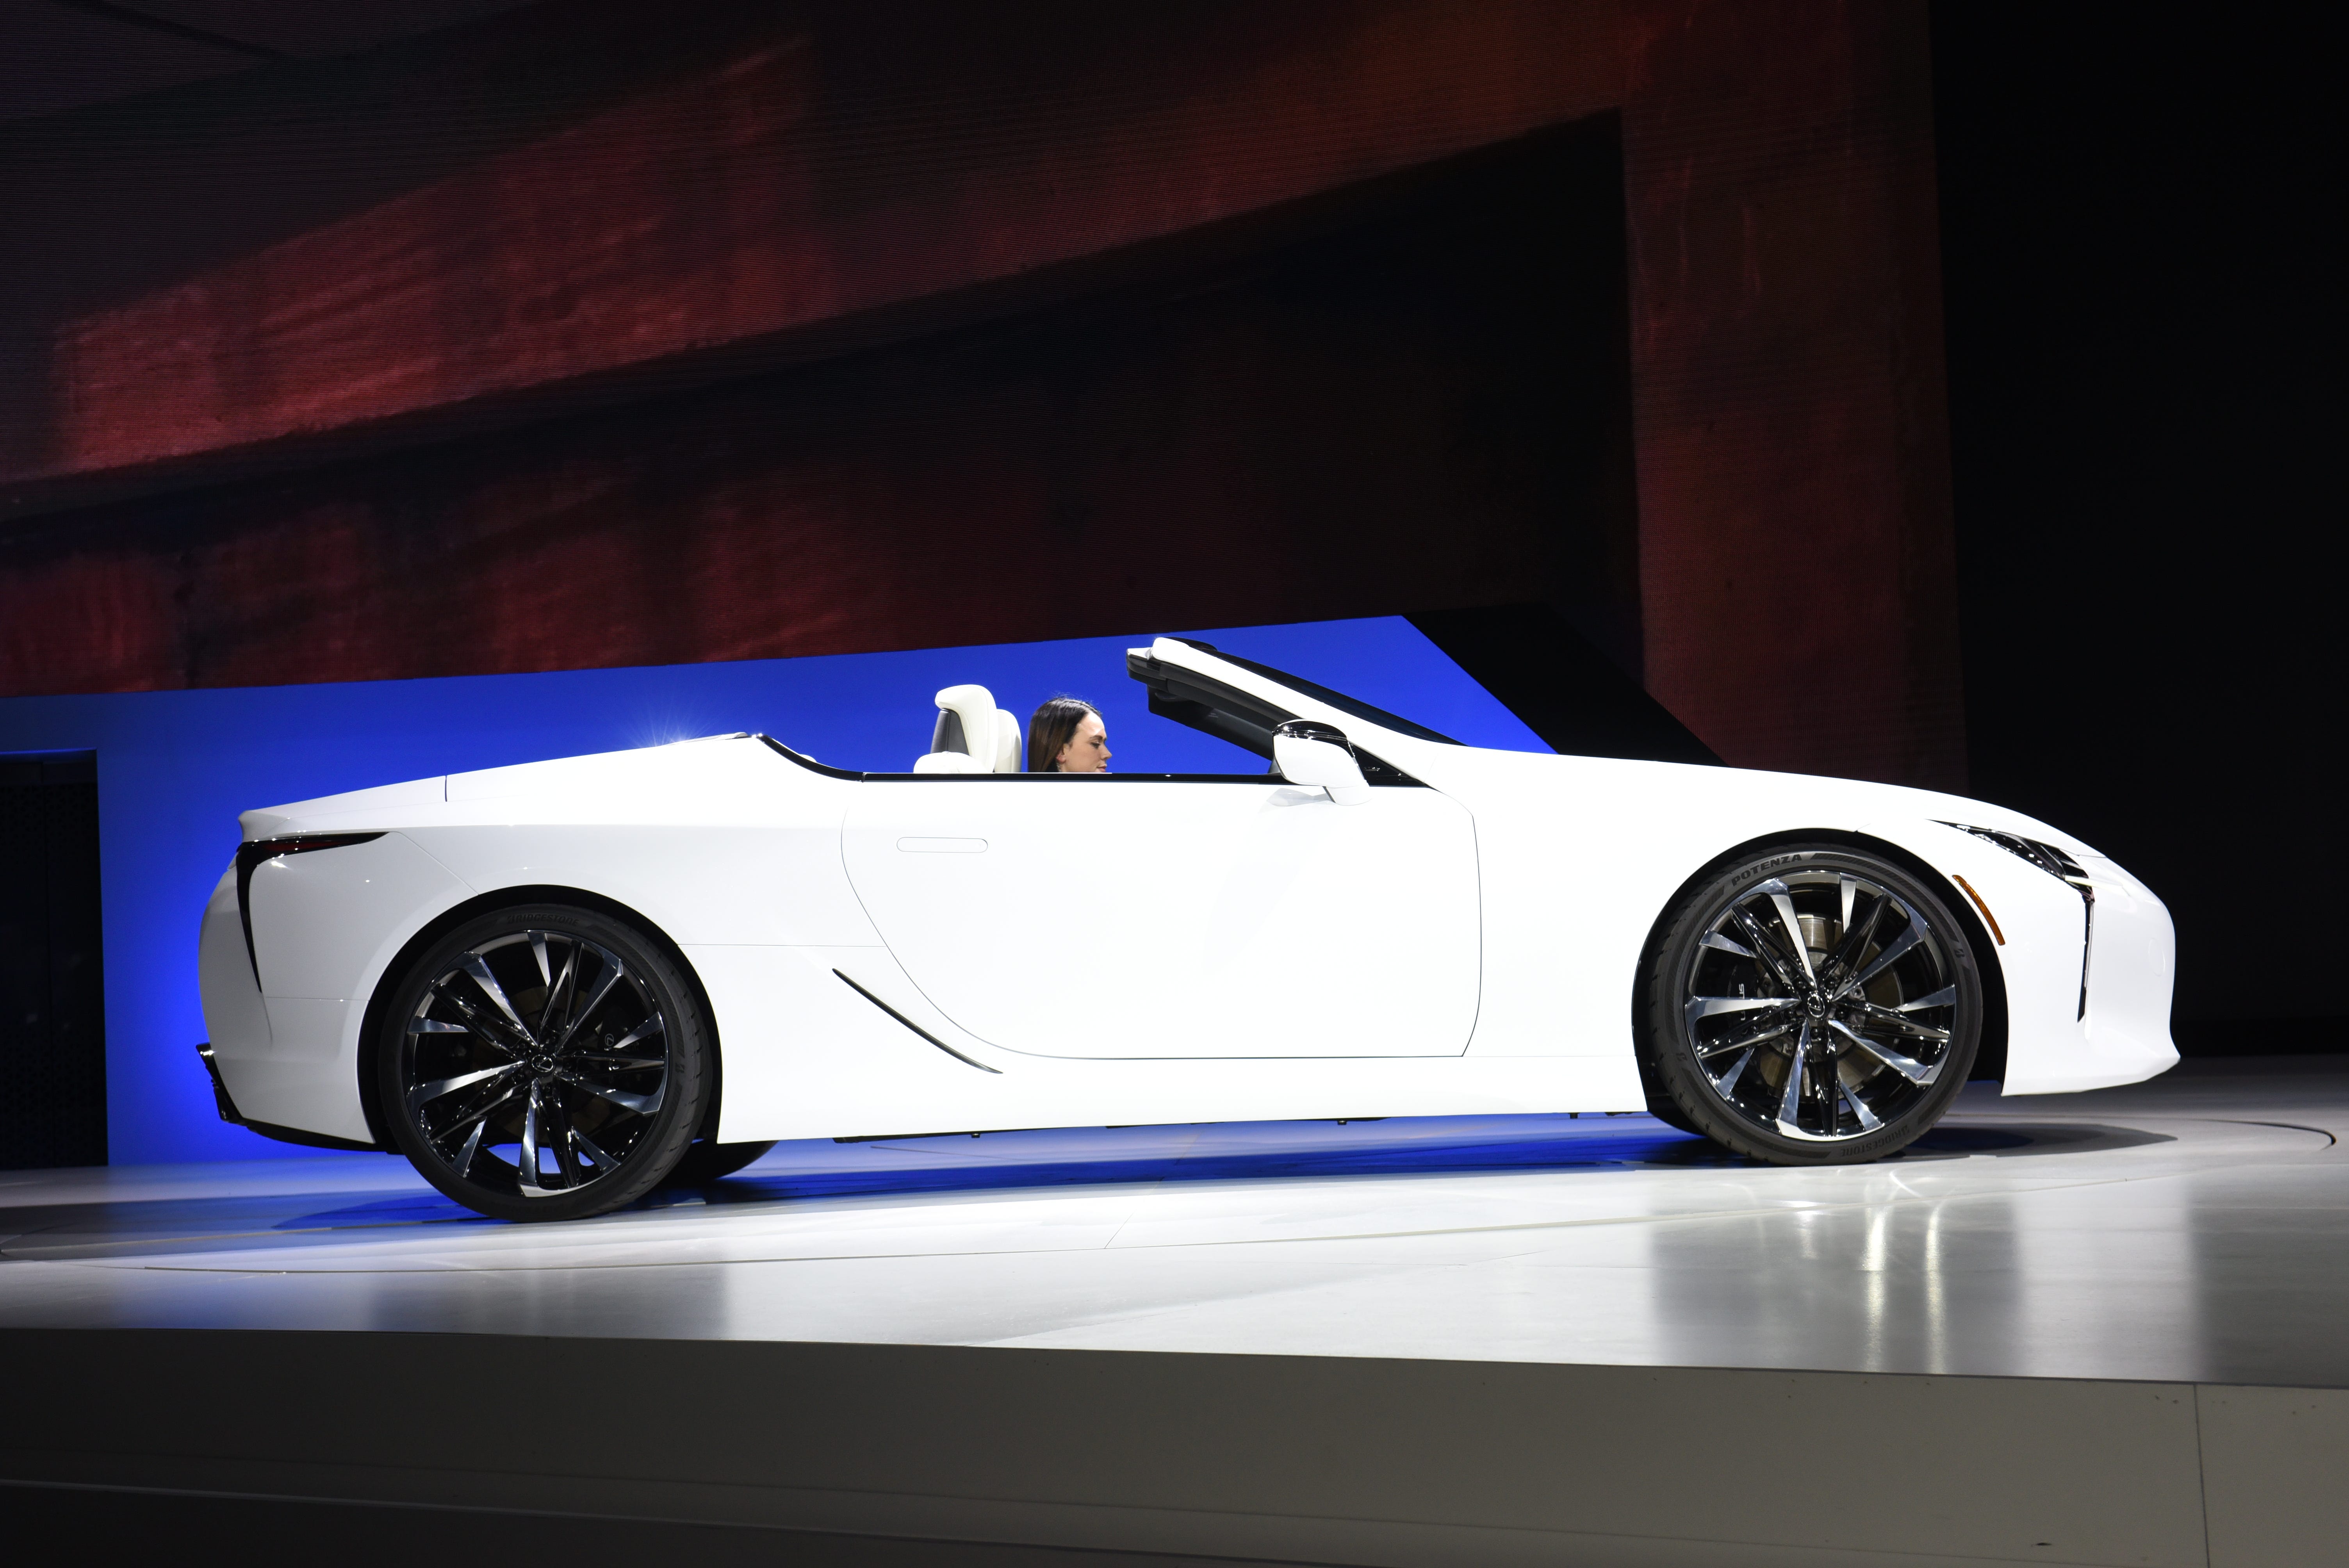 This is the Lexus LC Convertible concept.